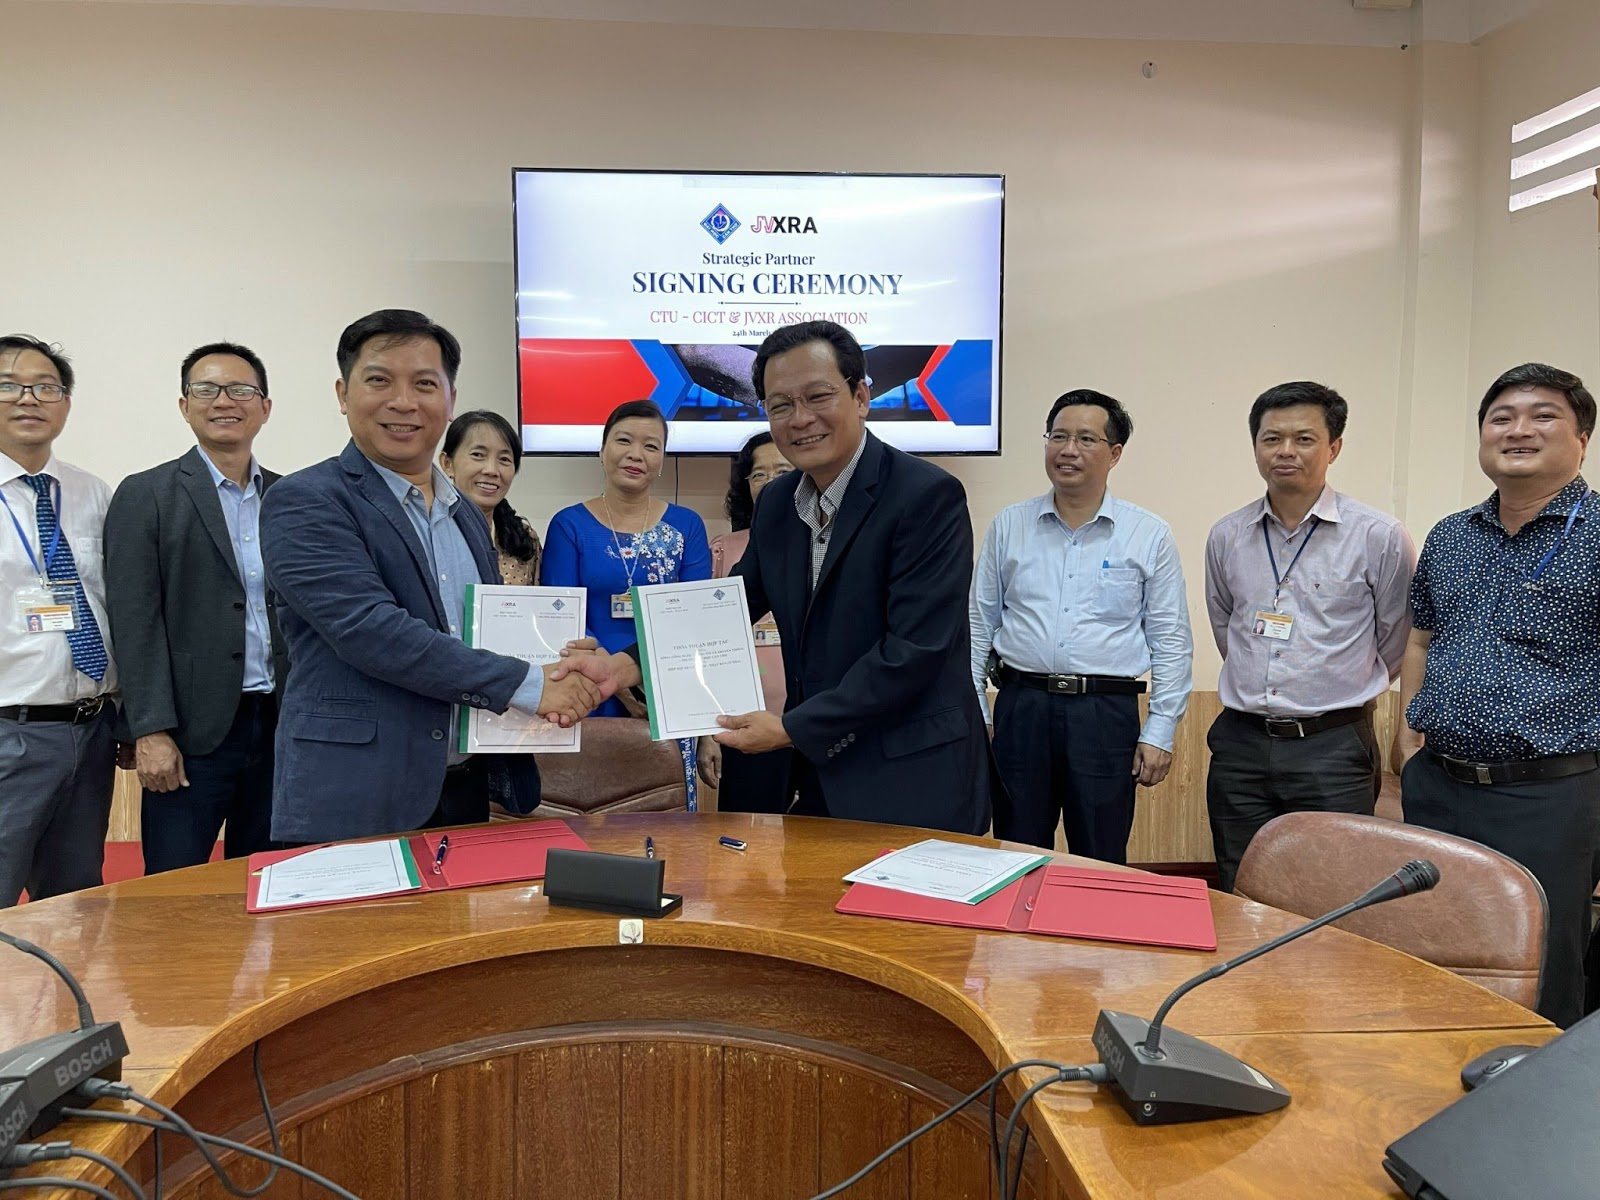 JVXRA Co-founder, Mr. Nguyen Anh Bang (left) signed a cooperation agreement with Dr. Nguyen Huu Hoa, Head of Faculty of Information Technology and Communications, Can Tho University